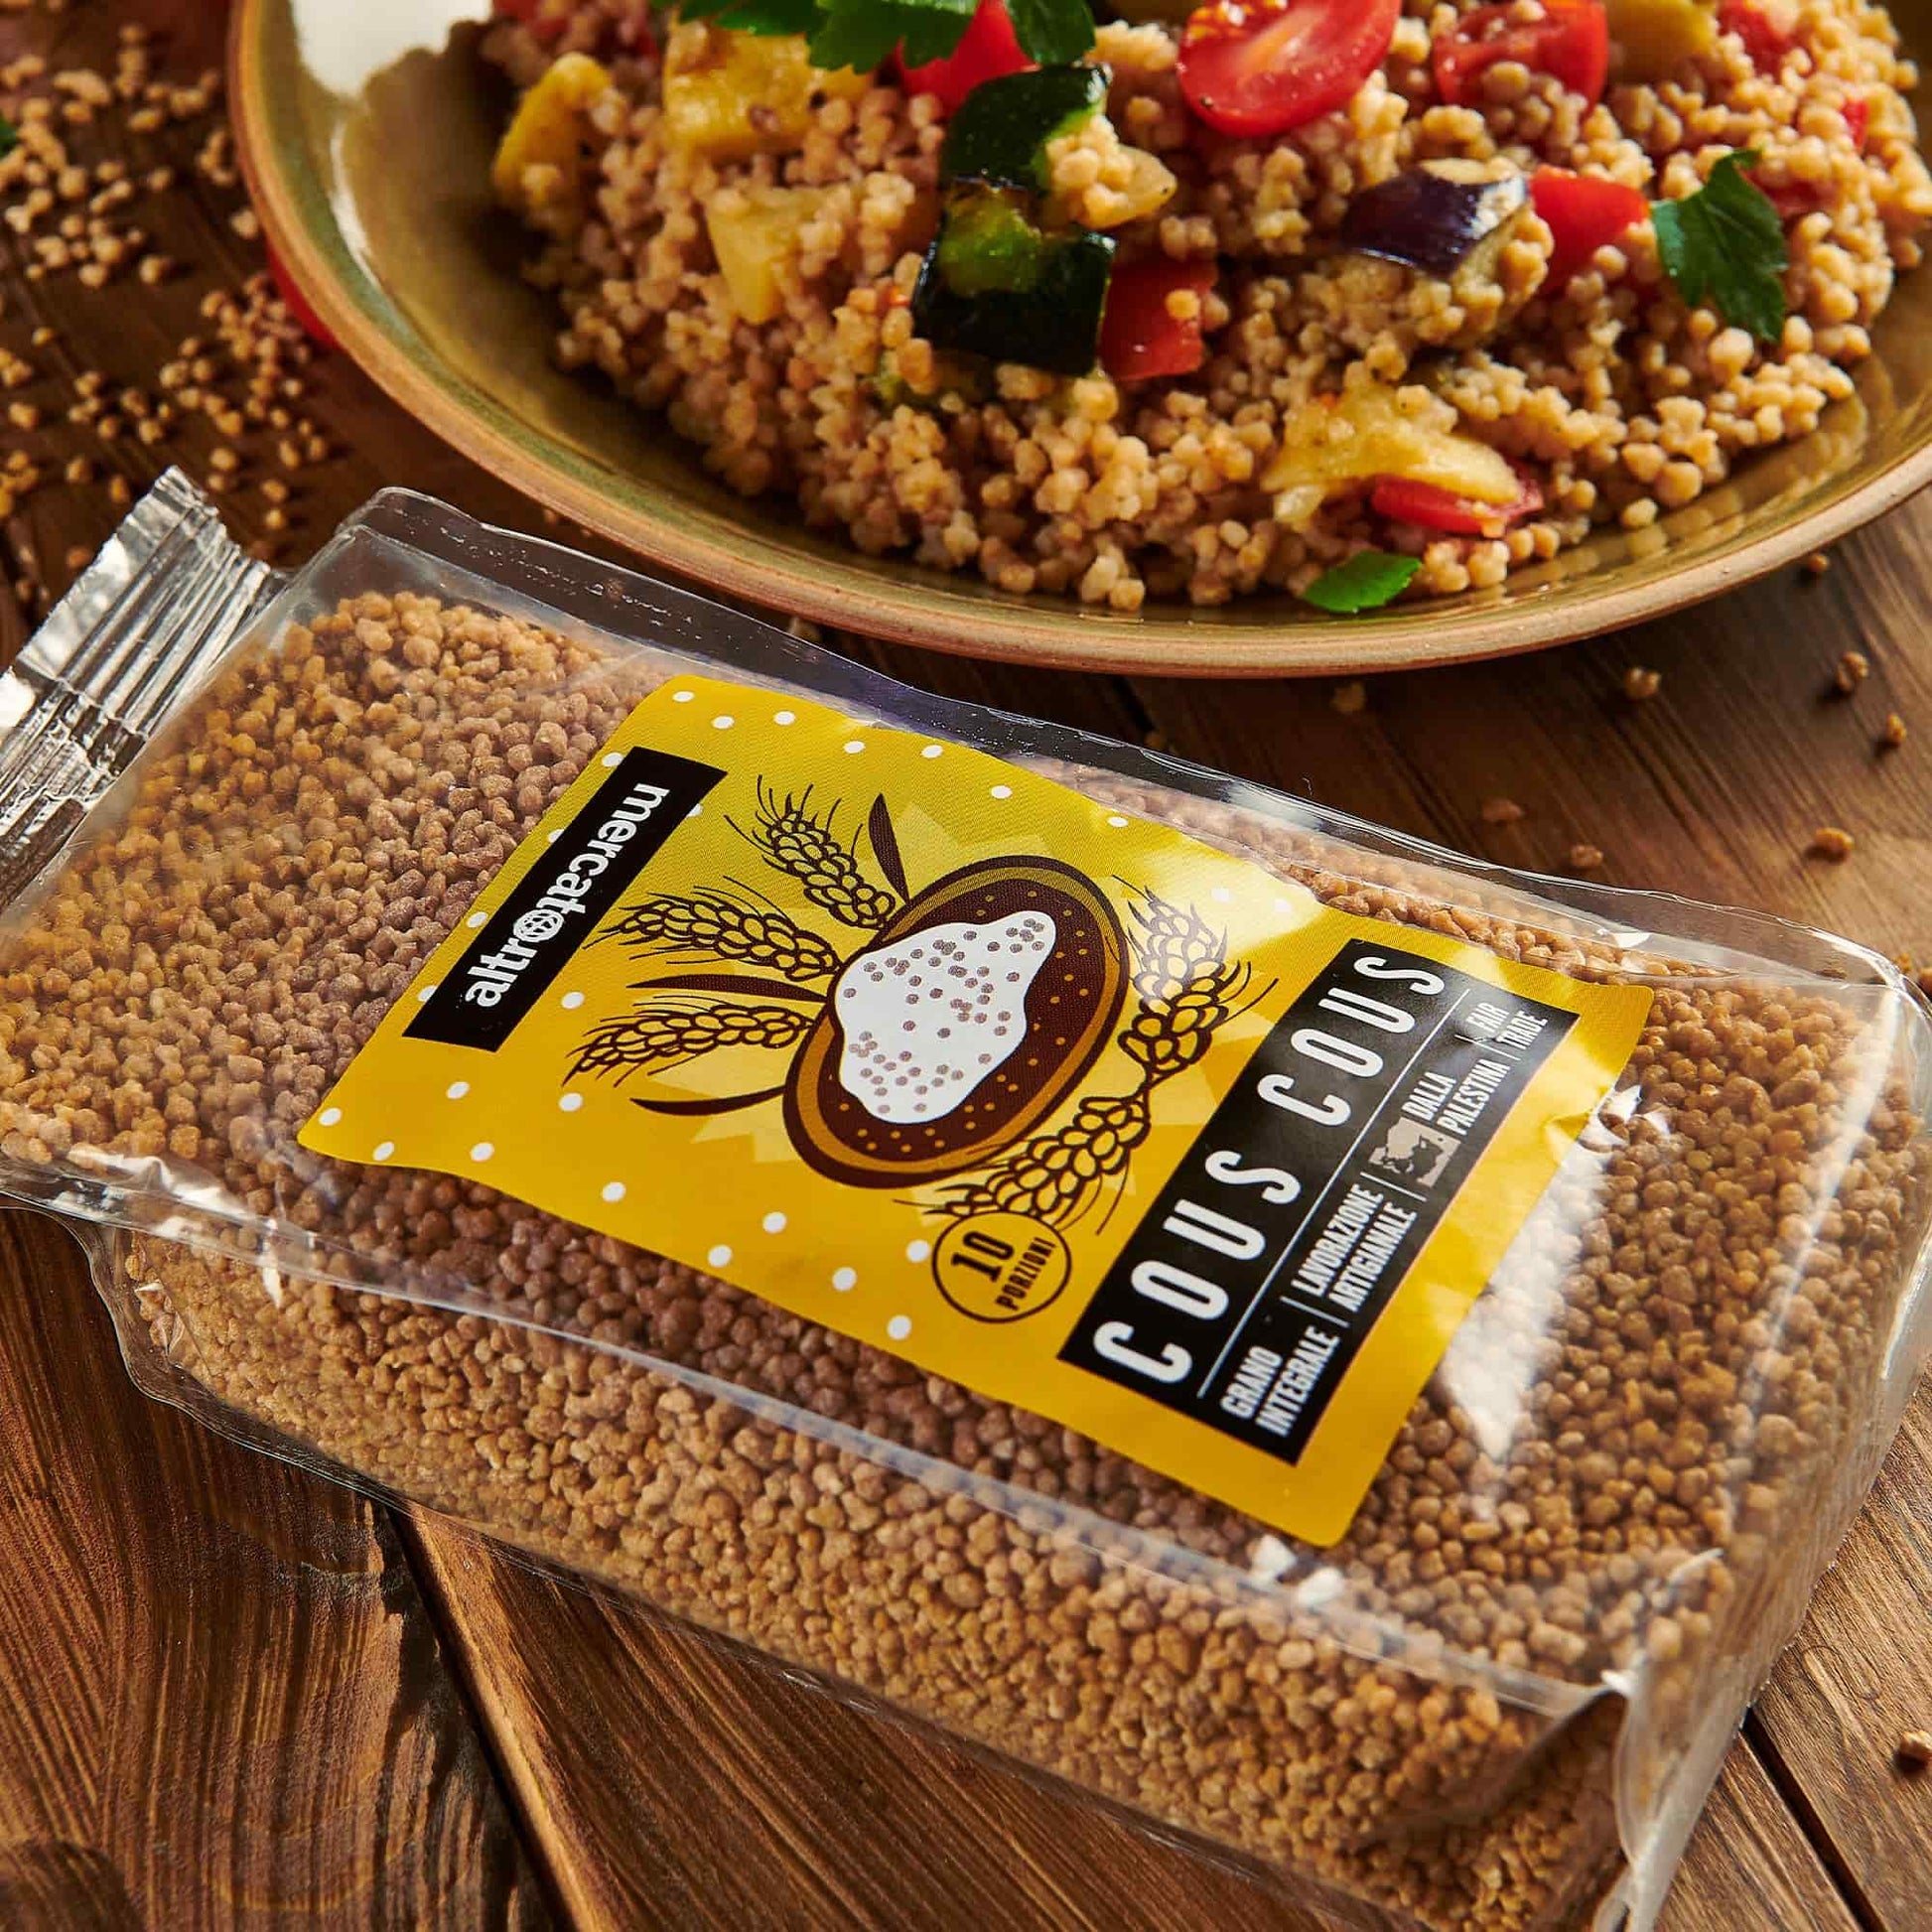 Cous cous integrale - Palestinese. 500g - Drugstore Napoli